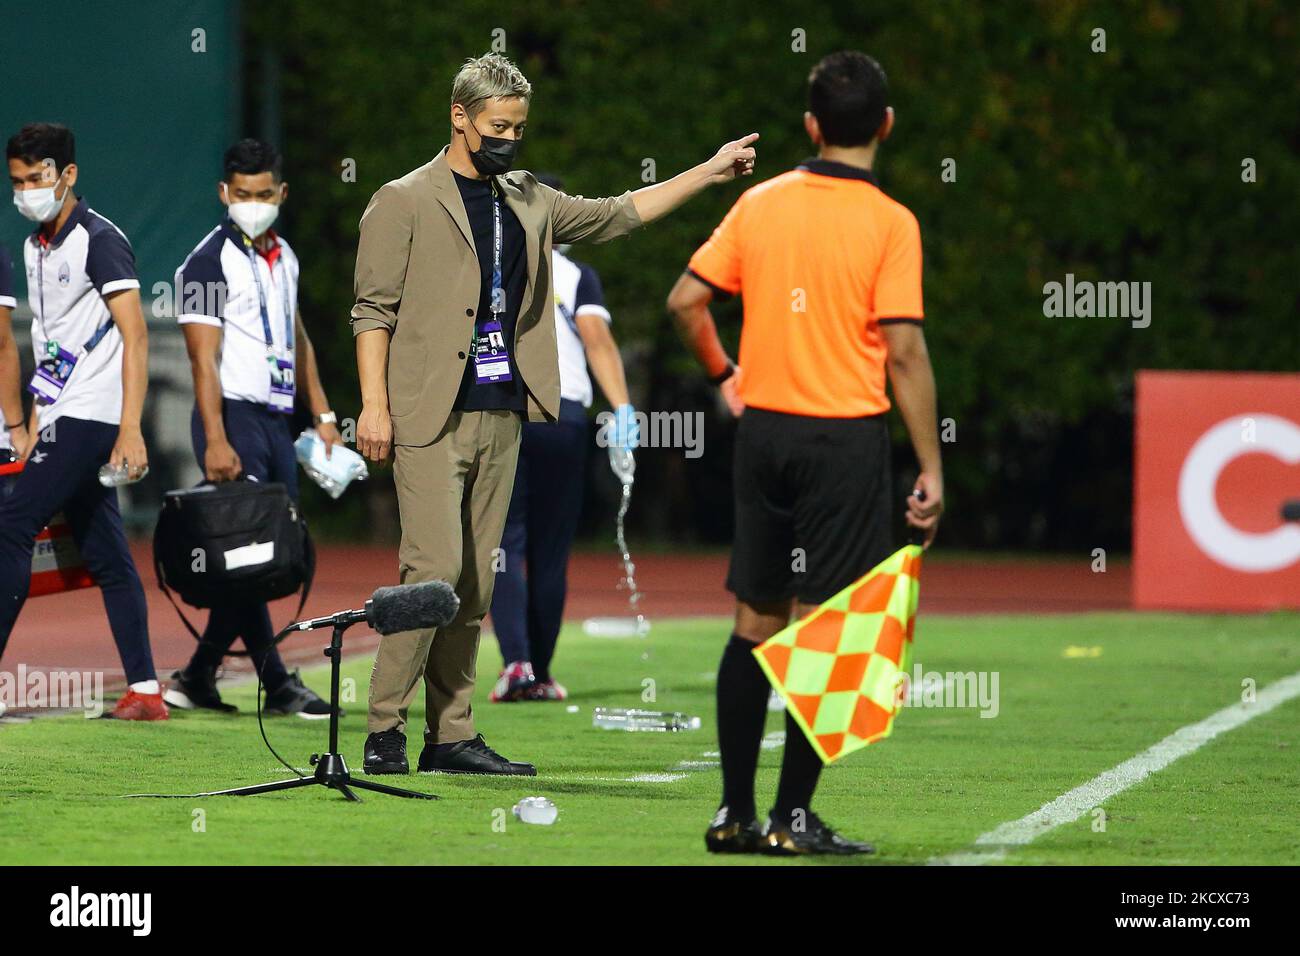 Cambodia general manager, Keisuke Honda gestures at the official during the AFF Suzuki Cup 2020 Group B match between Cambodia and Malaysia at Bishan Stadium on December 6, 2021 in Singapore. (Photo by Suhaimi Abdullah/NurPhoto) Stock Photo